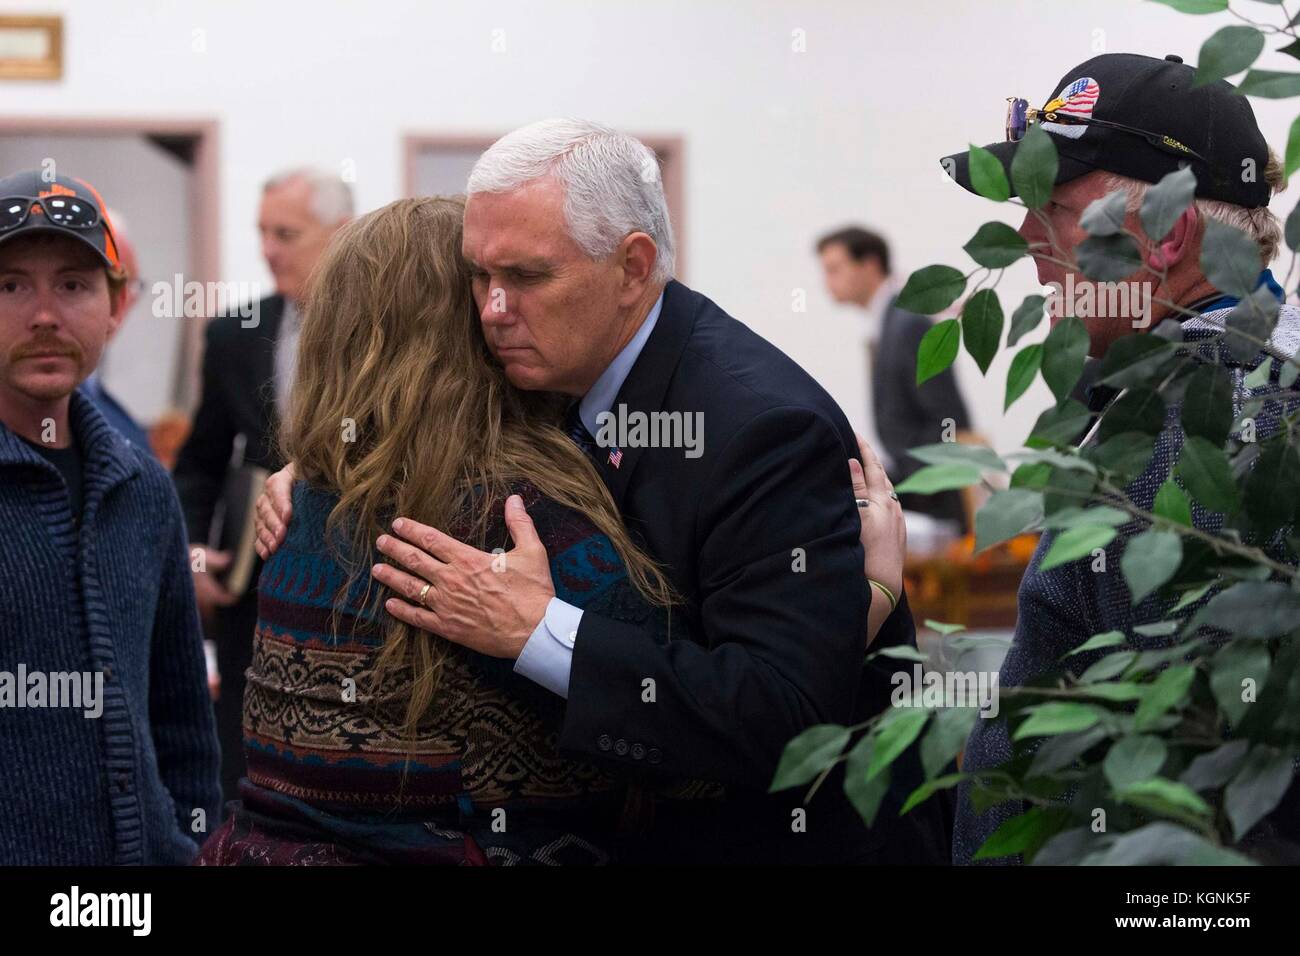 Texas, USA. 8th November, 2017. U.S. Vice President Mike Pence comforts a family members of the Sutherland Springs Baptist Church shooting during a visit to Brooke Army Medical Center November 8, 2017 in San Antonio, Texas. Credit: Planetpix/Alamy Live News Stock Photo